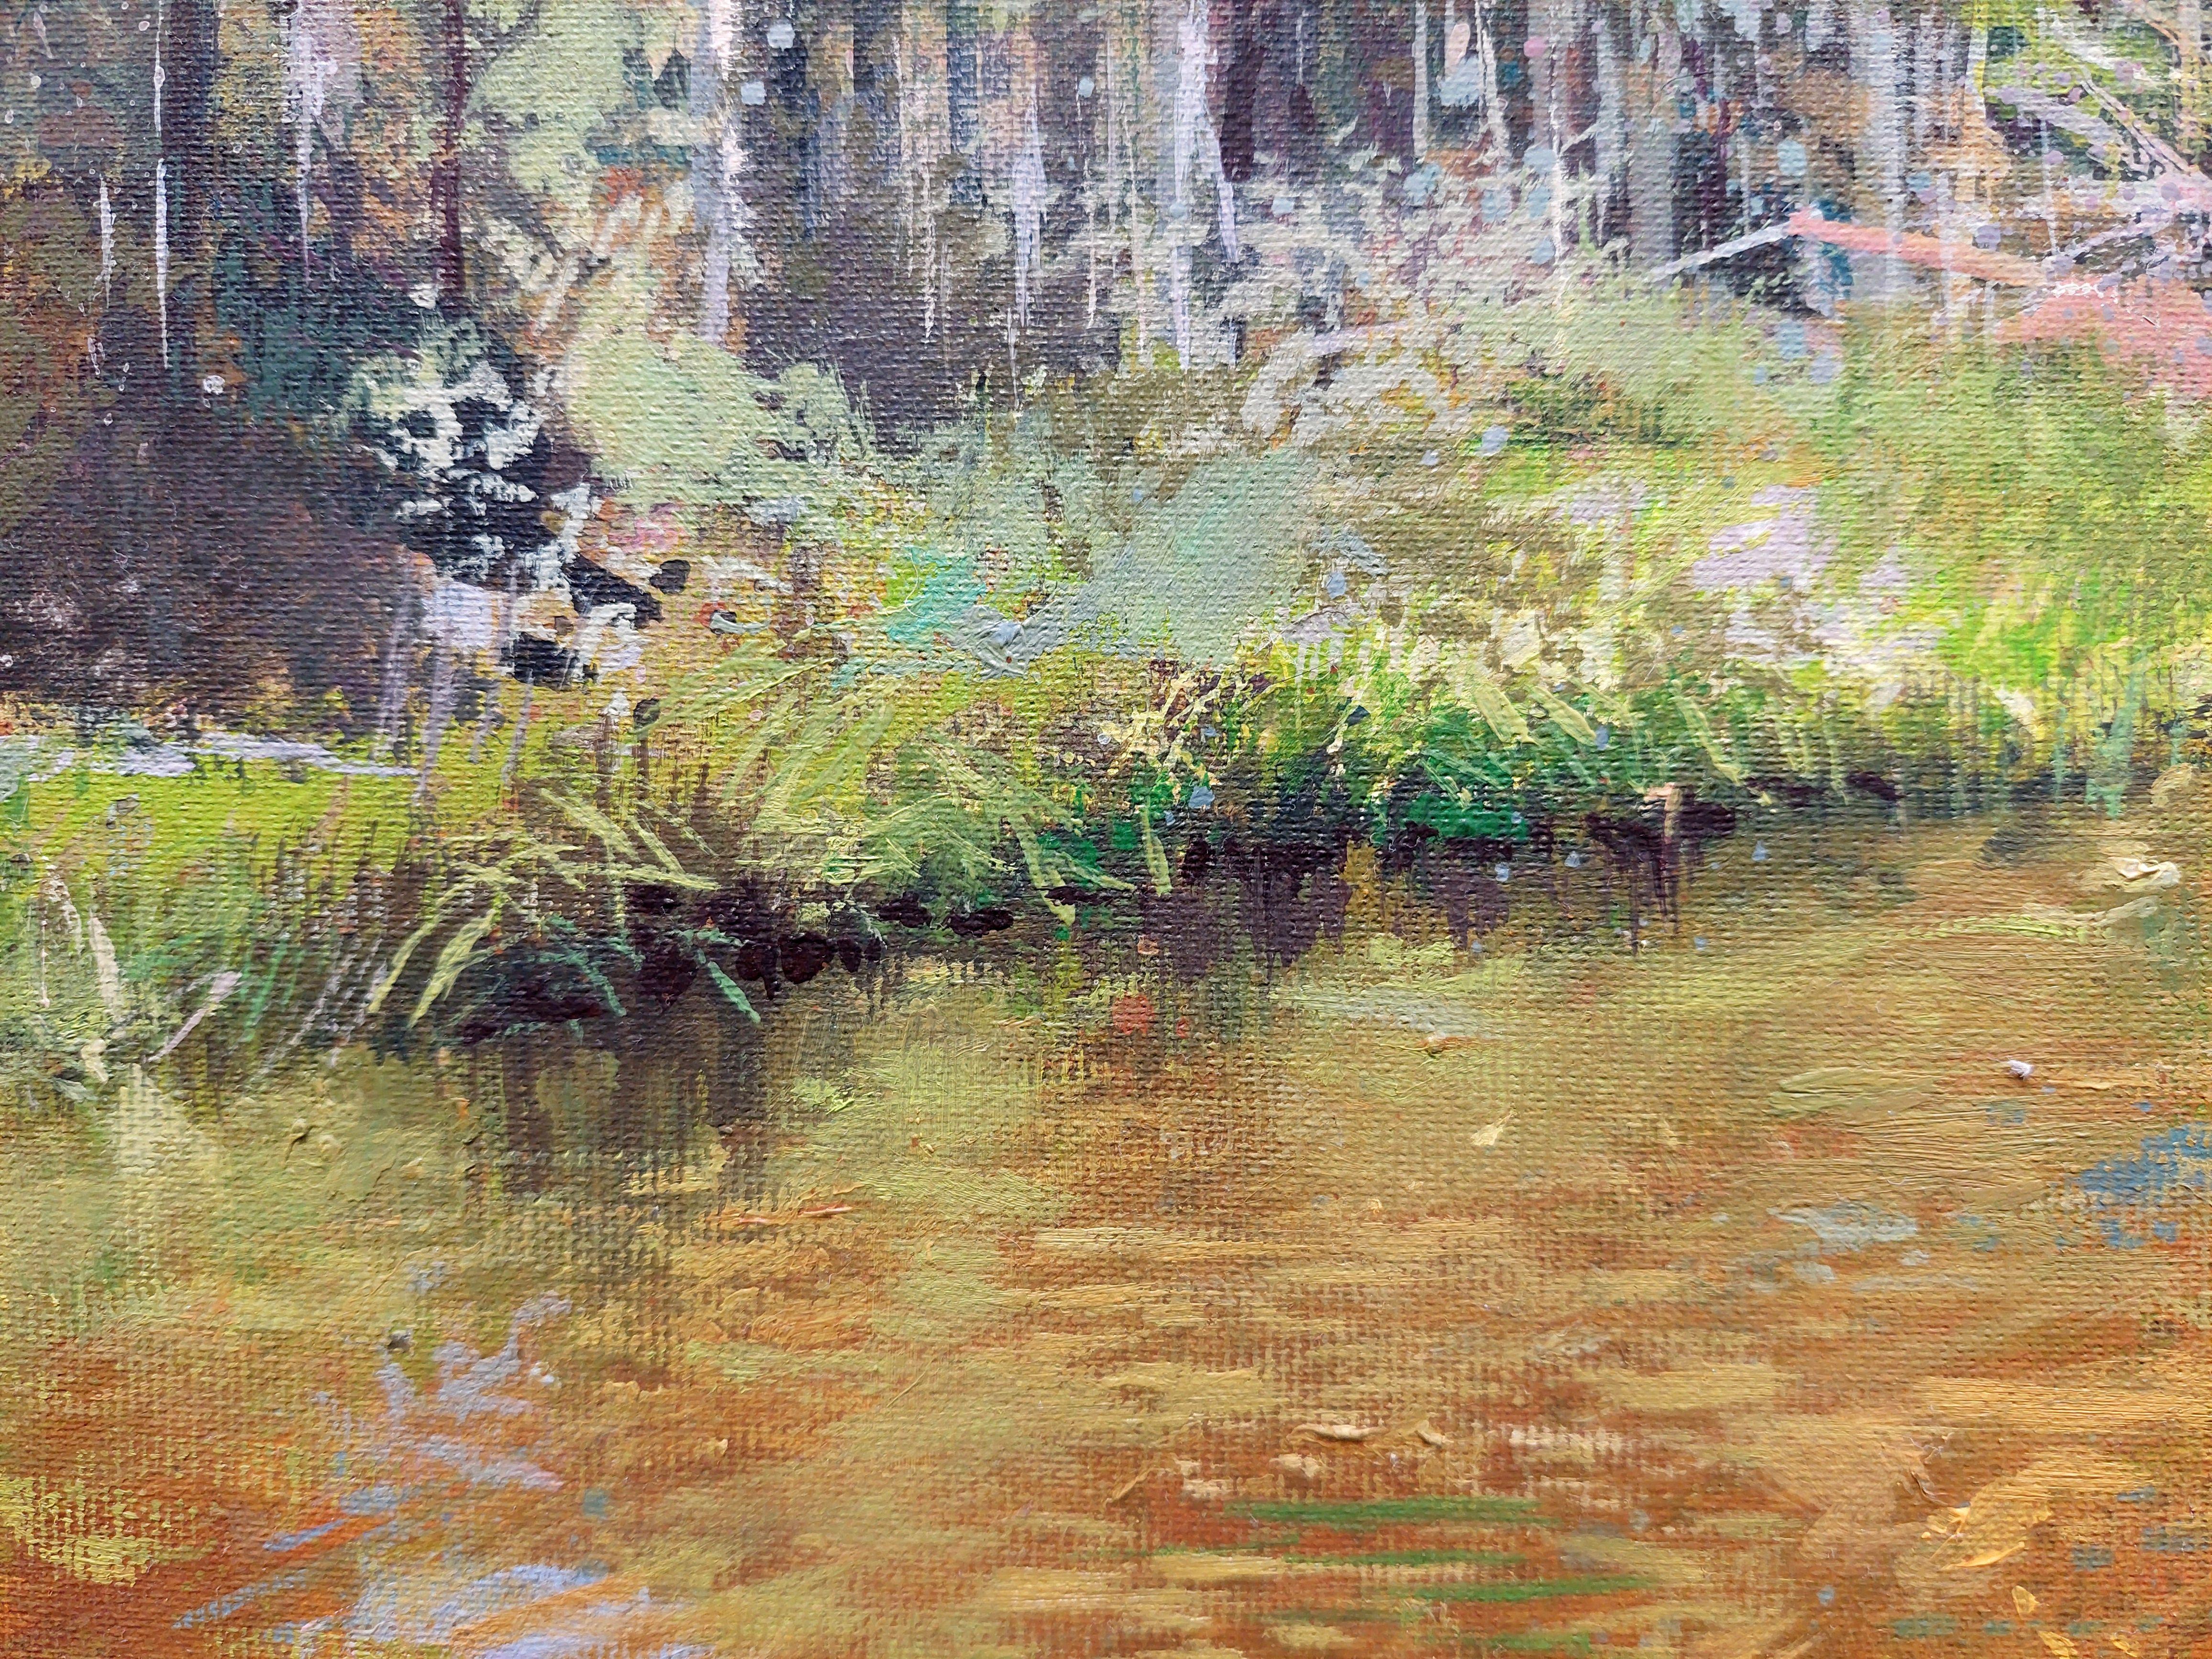 River in May, 2022., oil on canvas, 60x80 cm - Brown Landscape Painting by Janis Zingitis